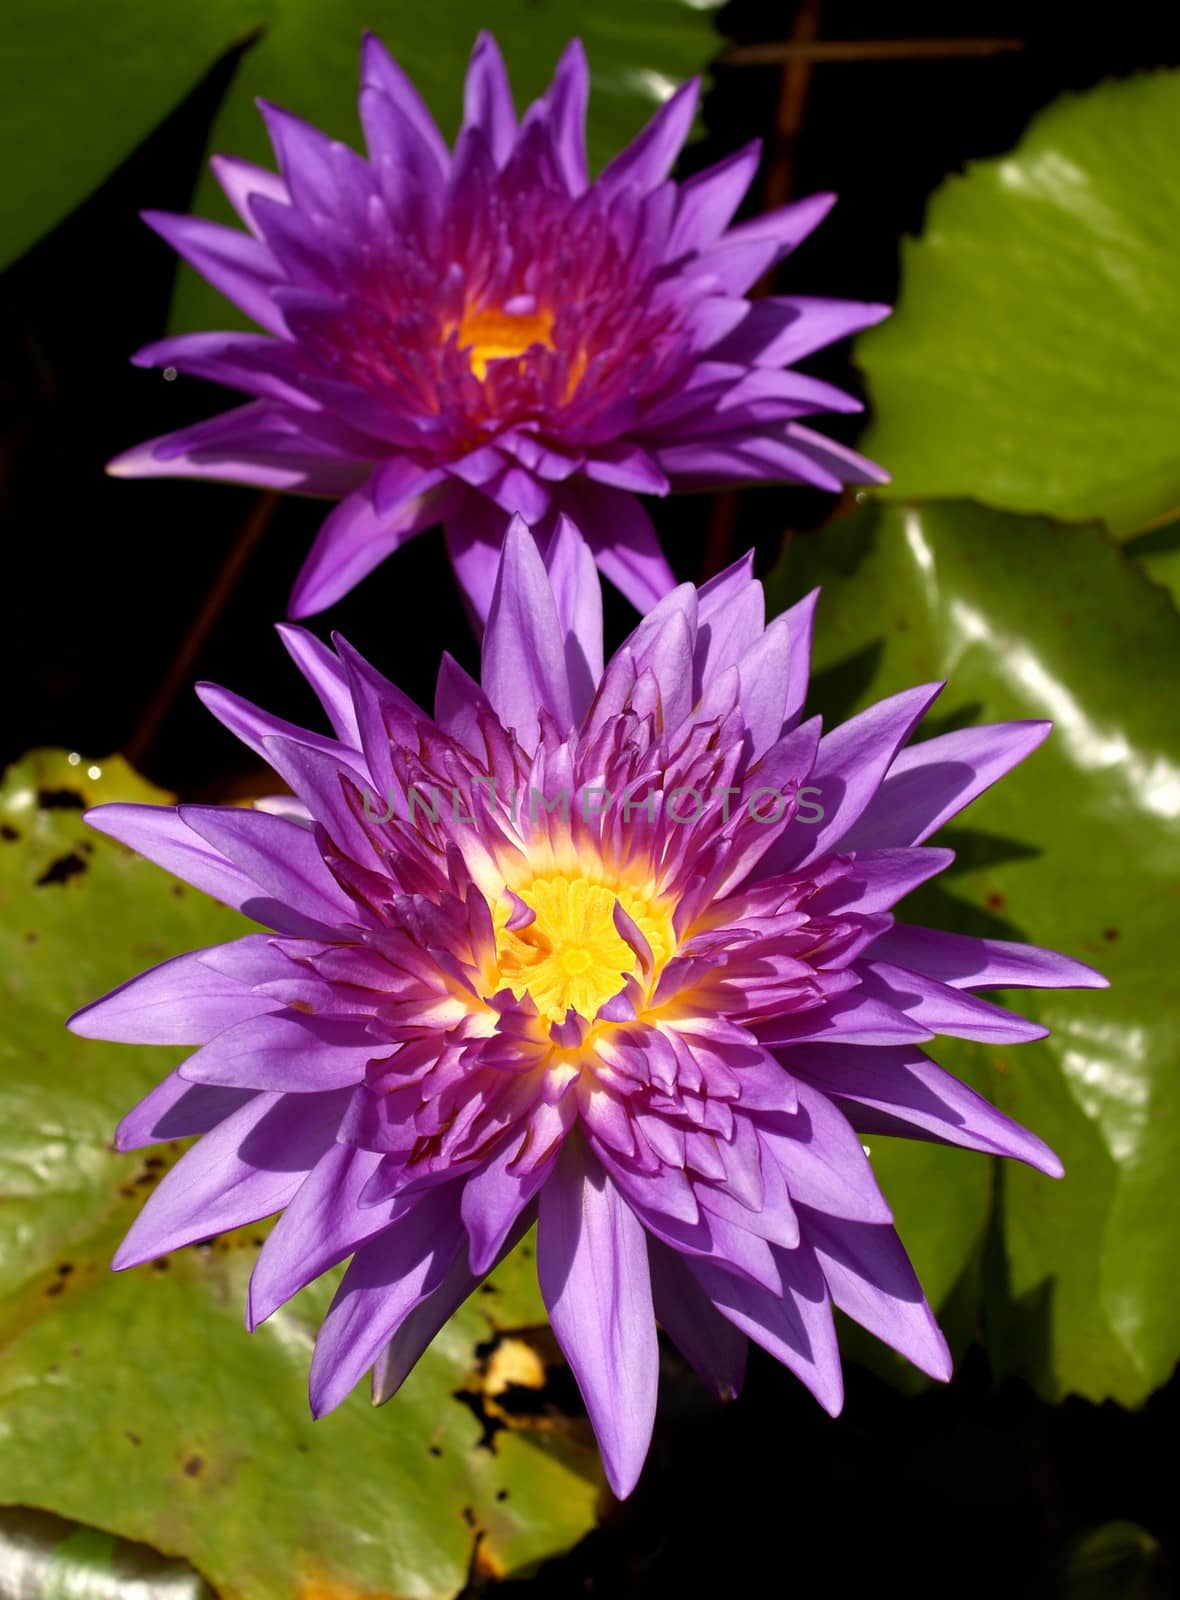 image of a lotus flower